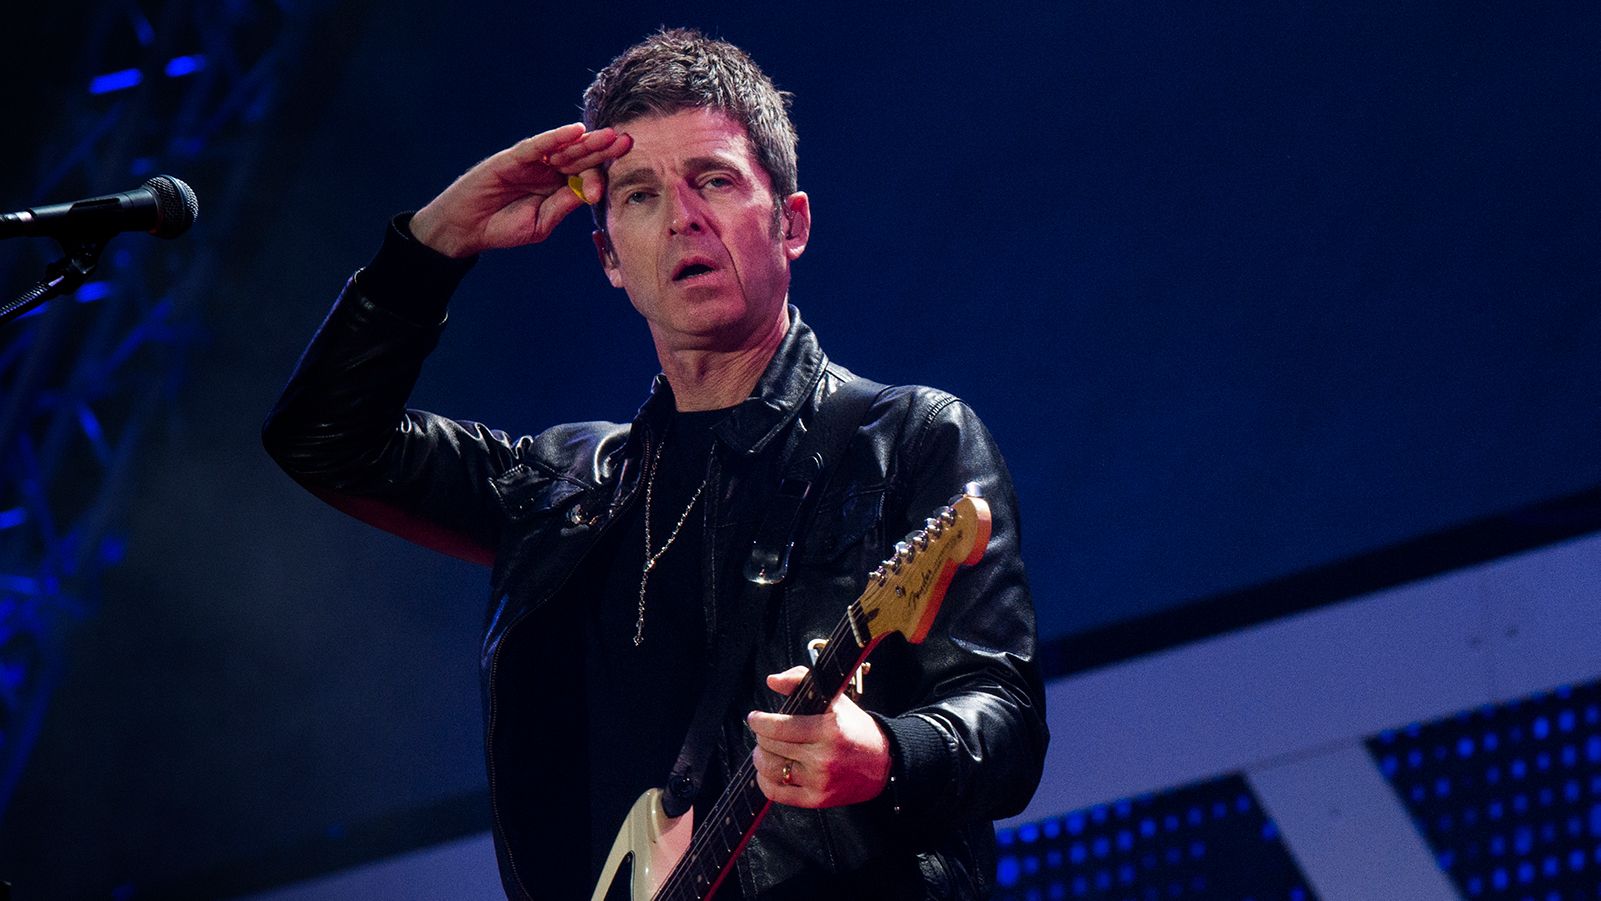 Noel Gallagher Said Oasis Is a Combo of The Beatles and 1 Other Band